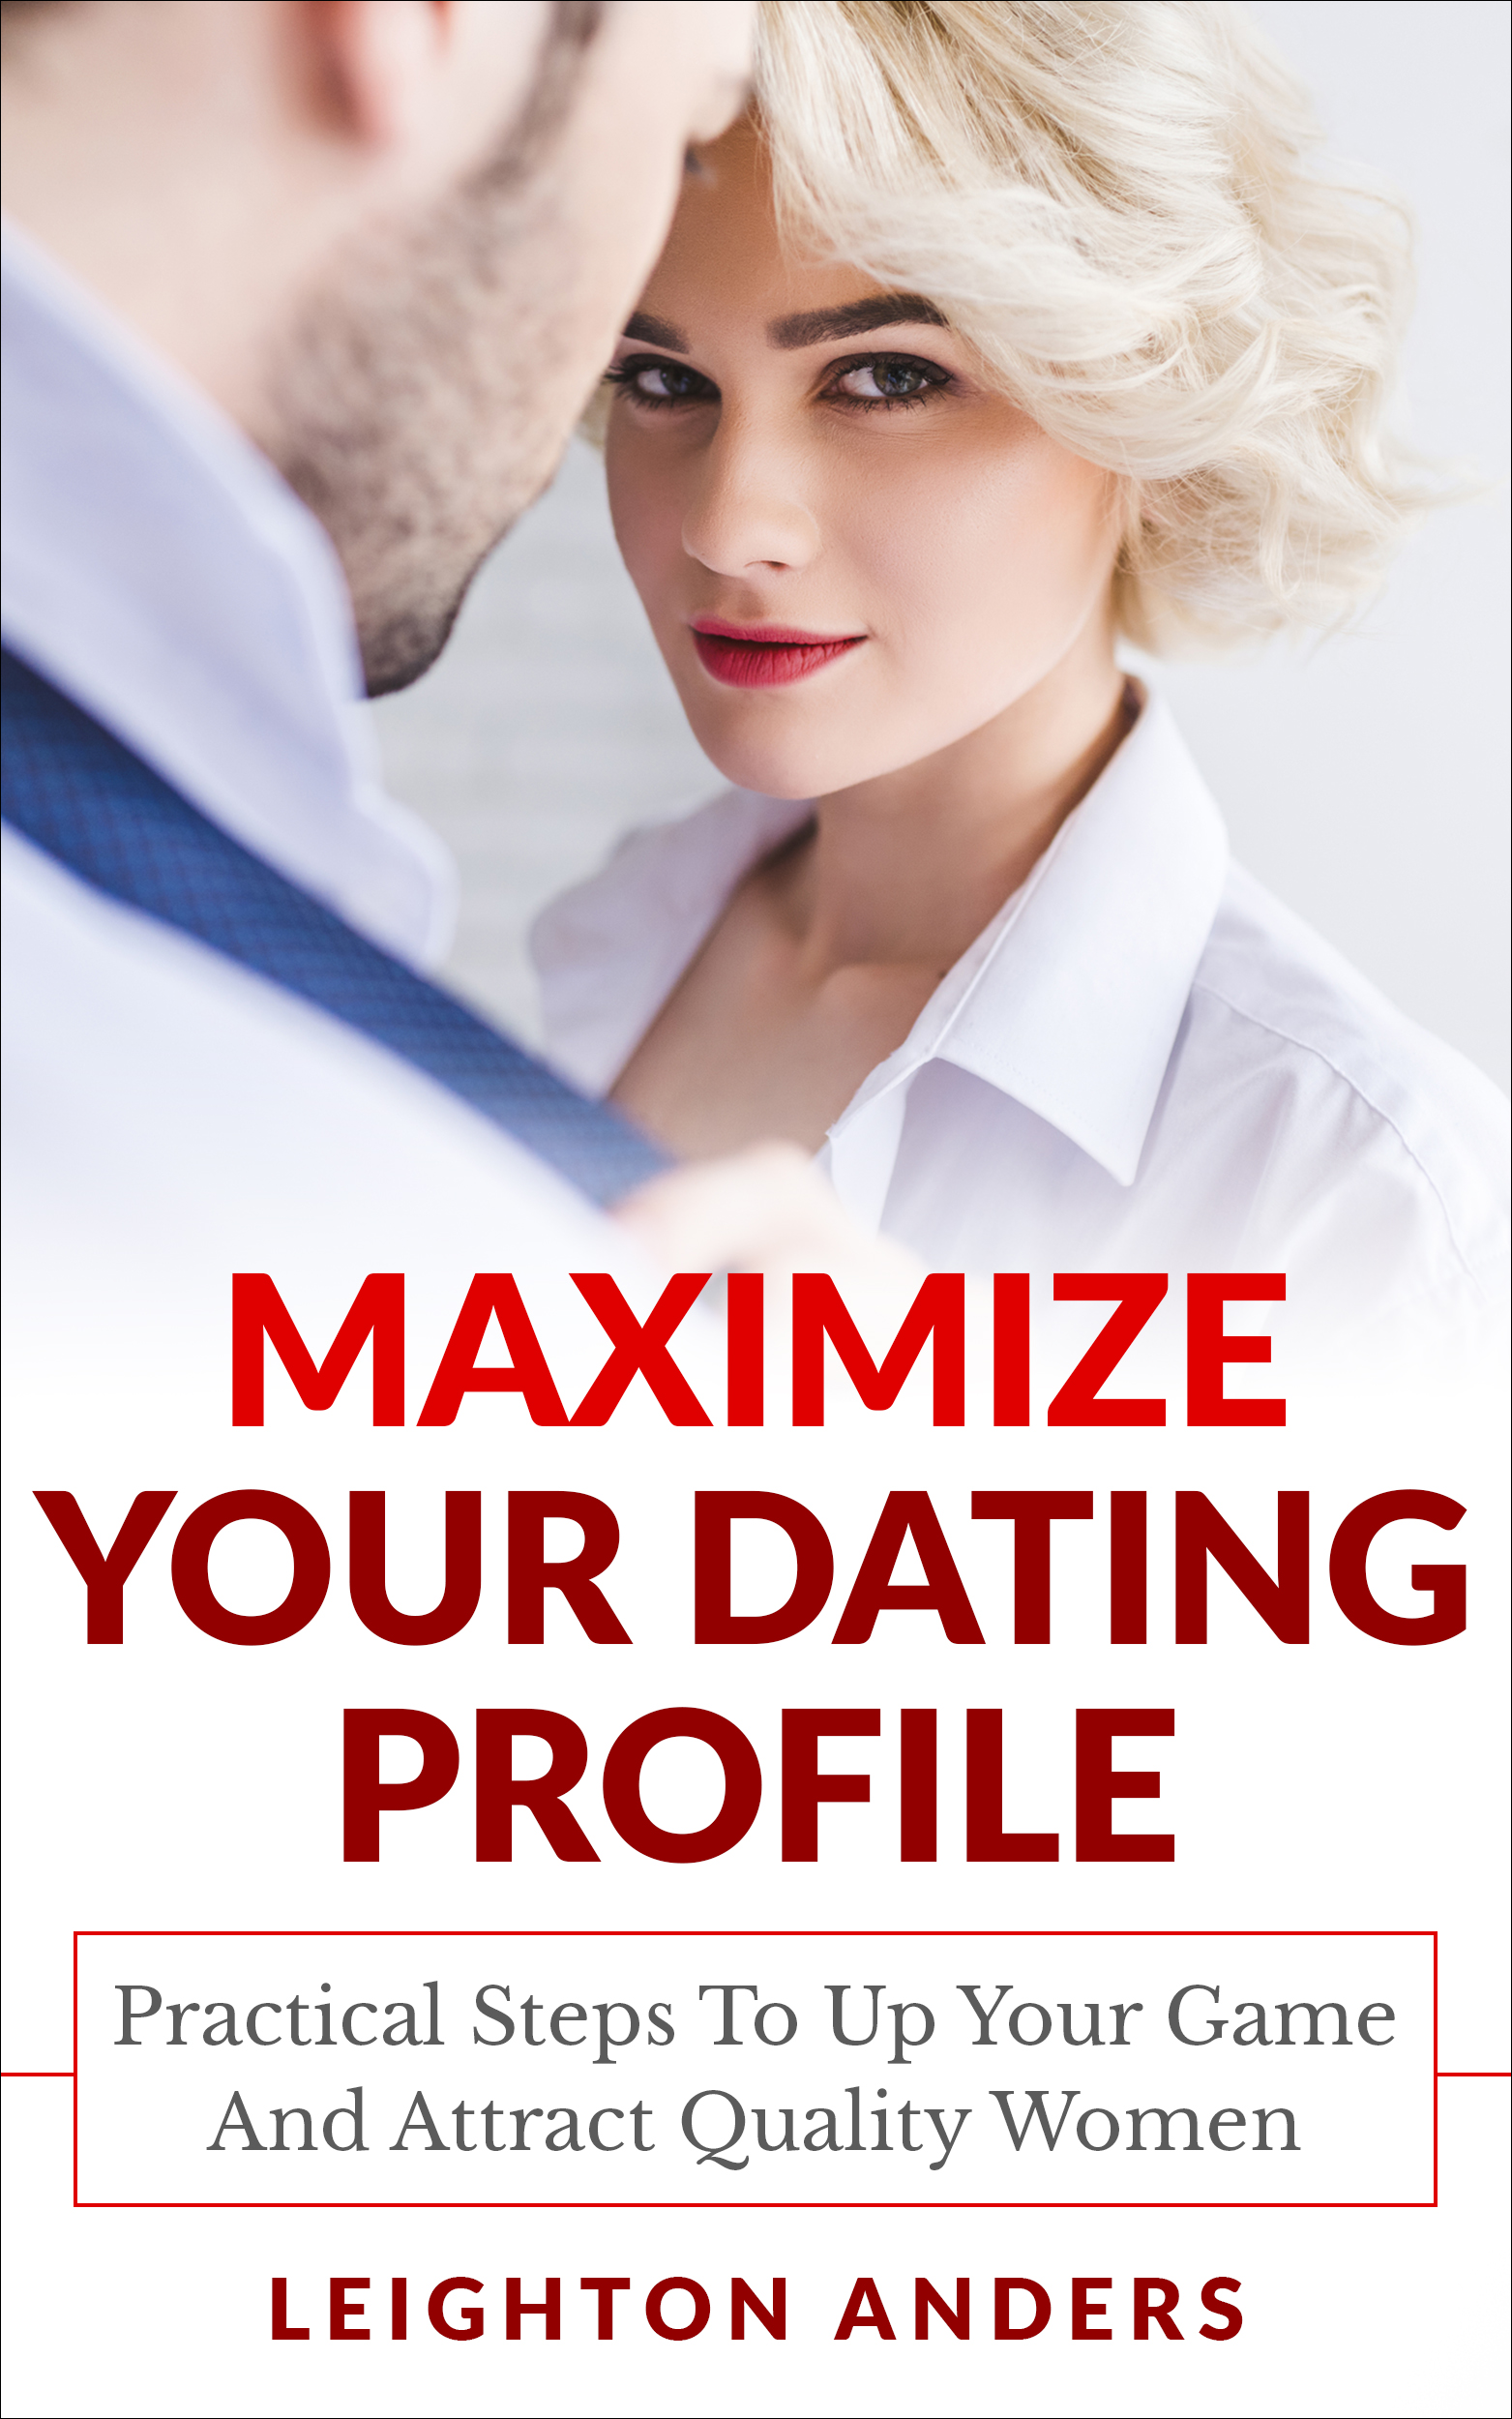 FREE: Maximize Your Dating Profile by Leighton Anders